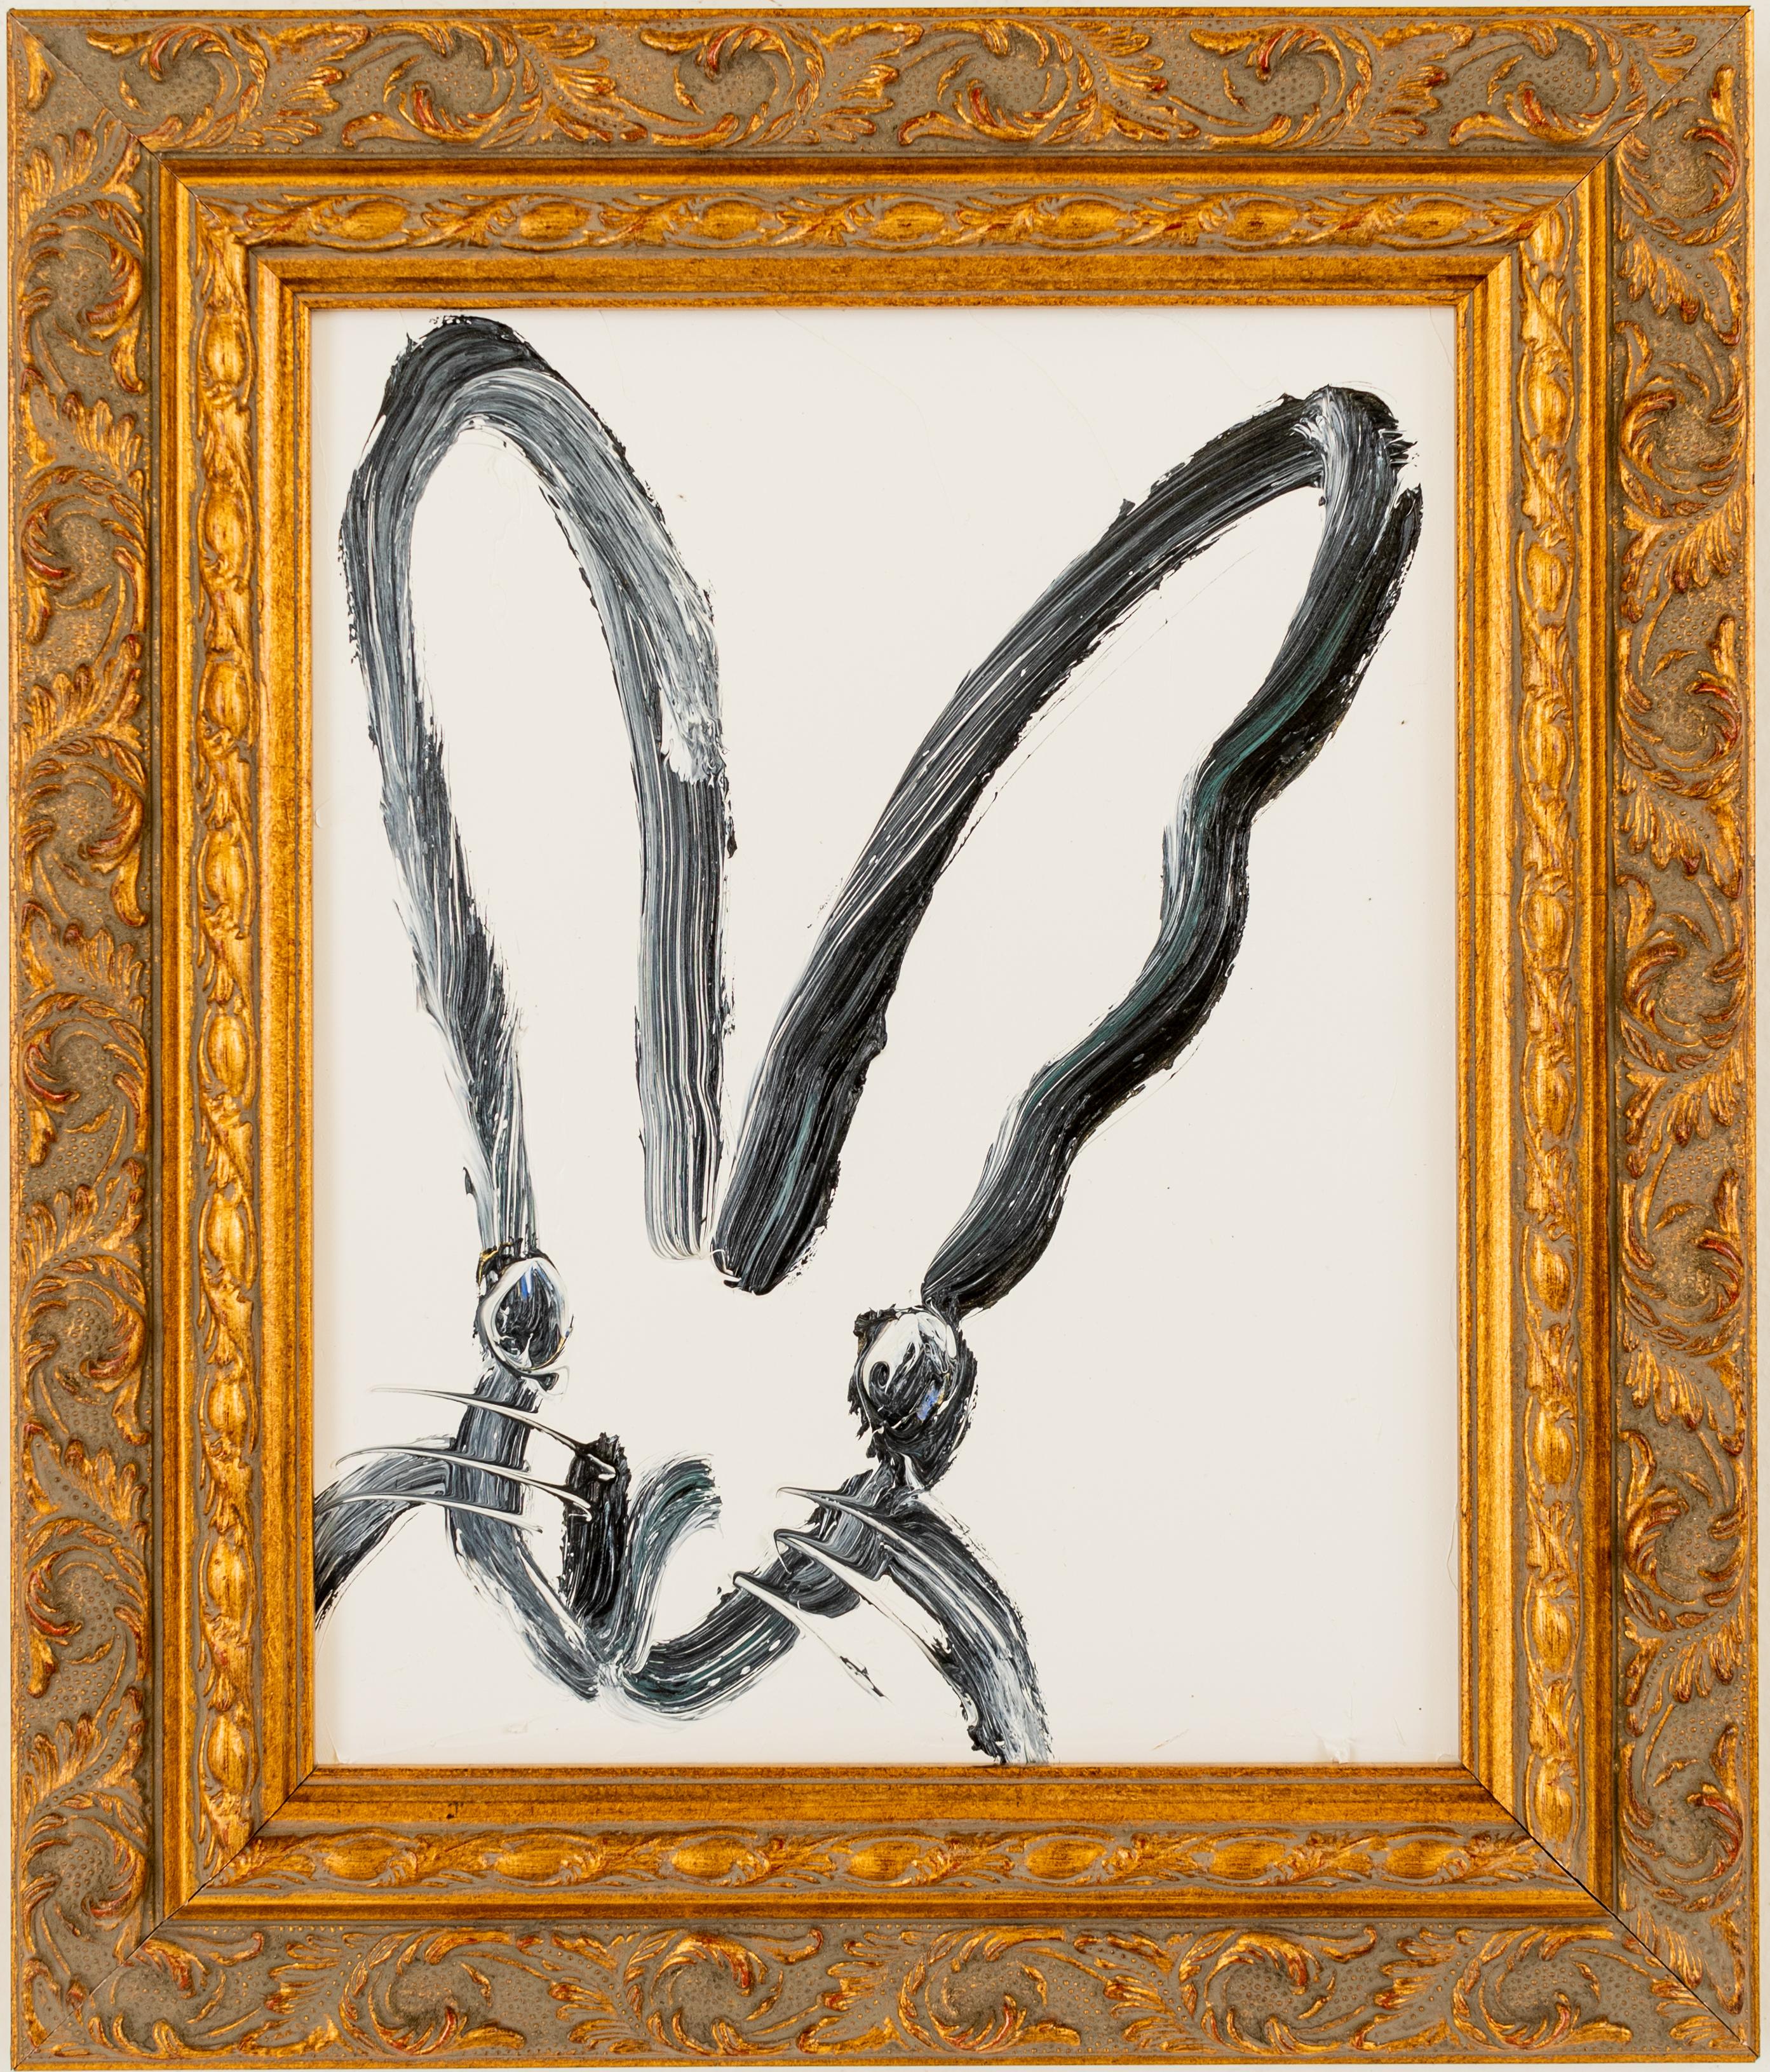 Hunt Slonem "Meg" Bunny
Black gestured bunny on a white background in a vintage frame

Unframed: 10 x 8 inches  
Framed: 14 x 12 inches
*Painting is framed - Please note that not all Hunt Slonem frames are not in mint condition. There may be signs